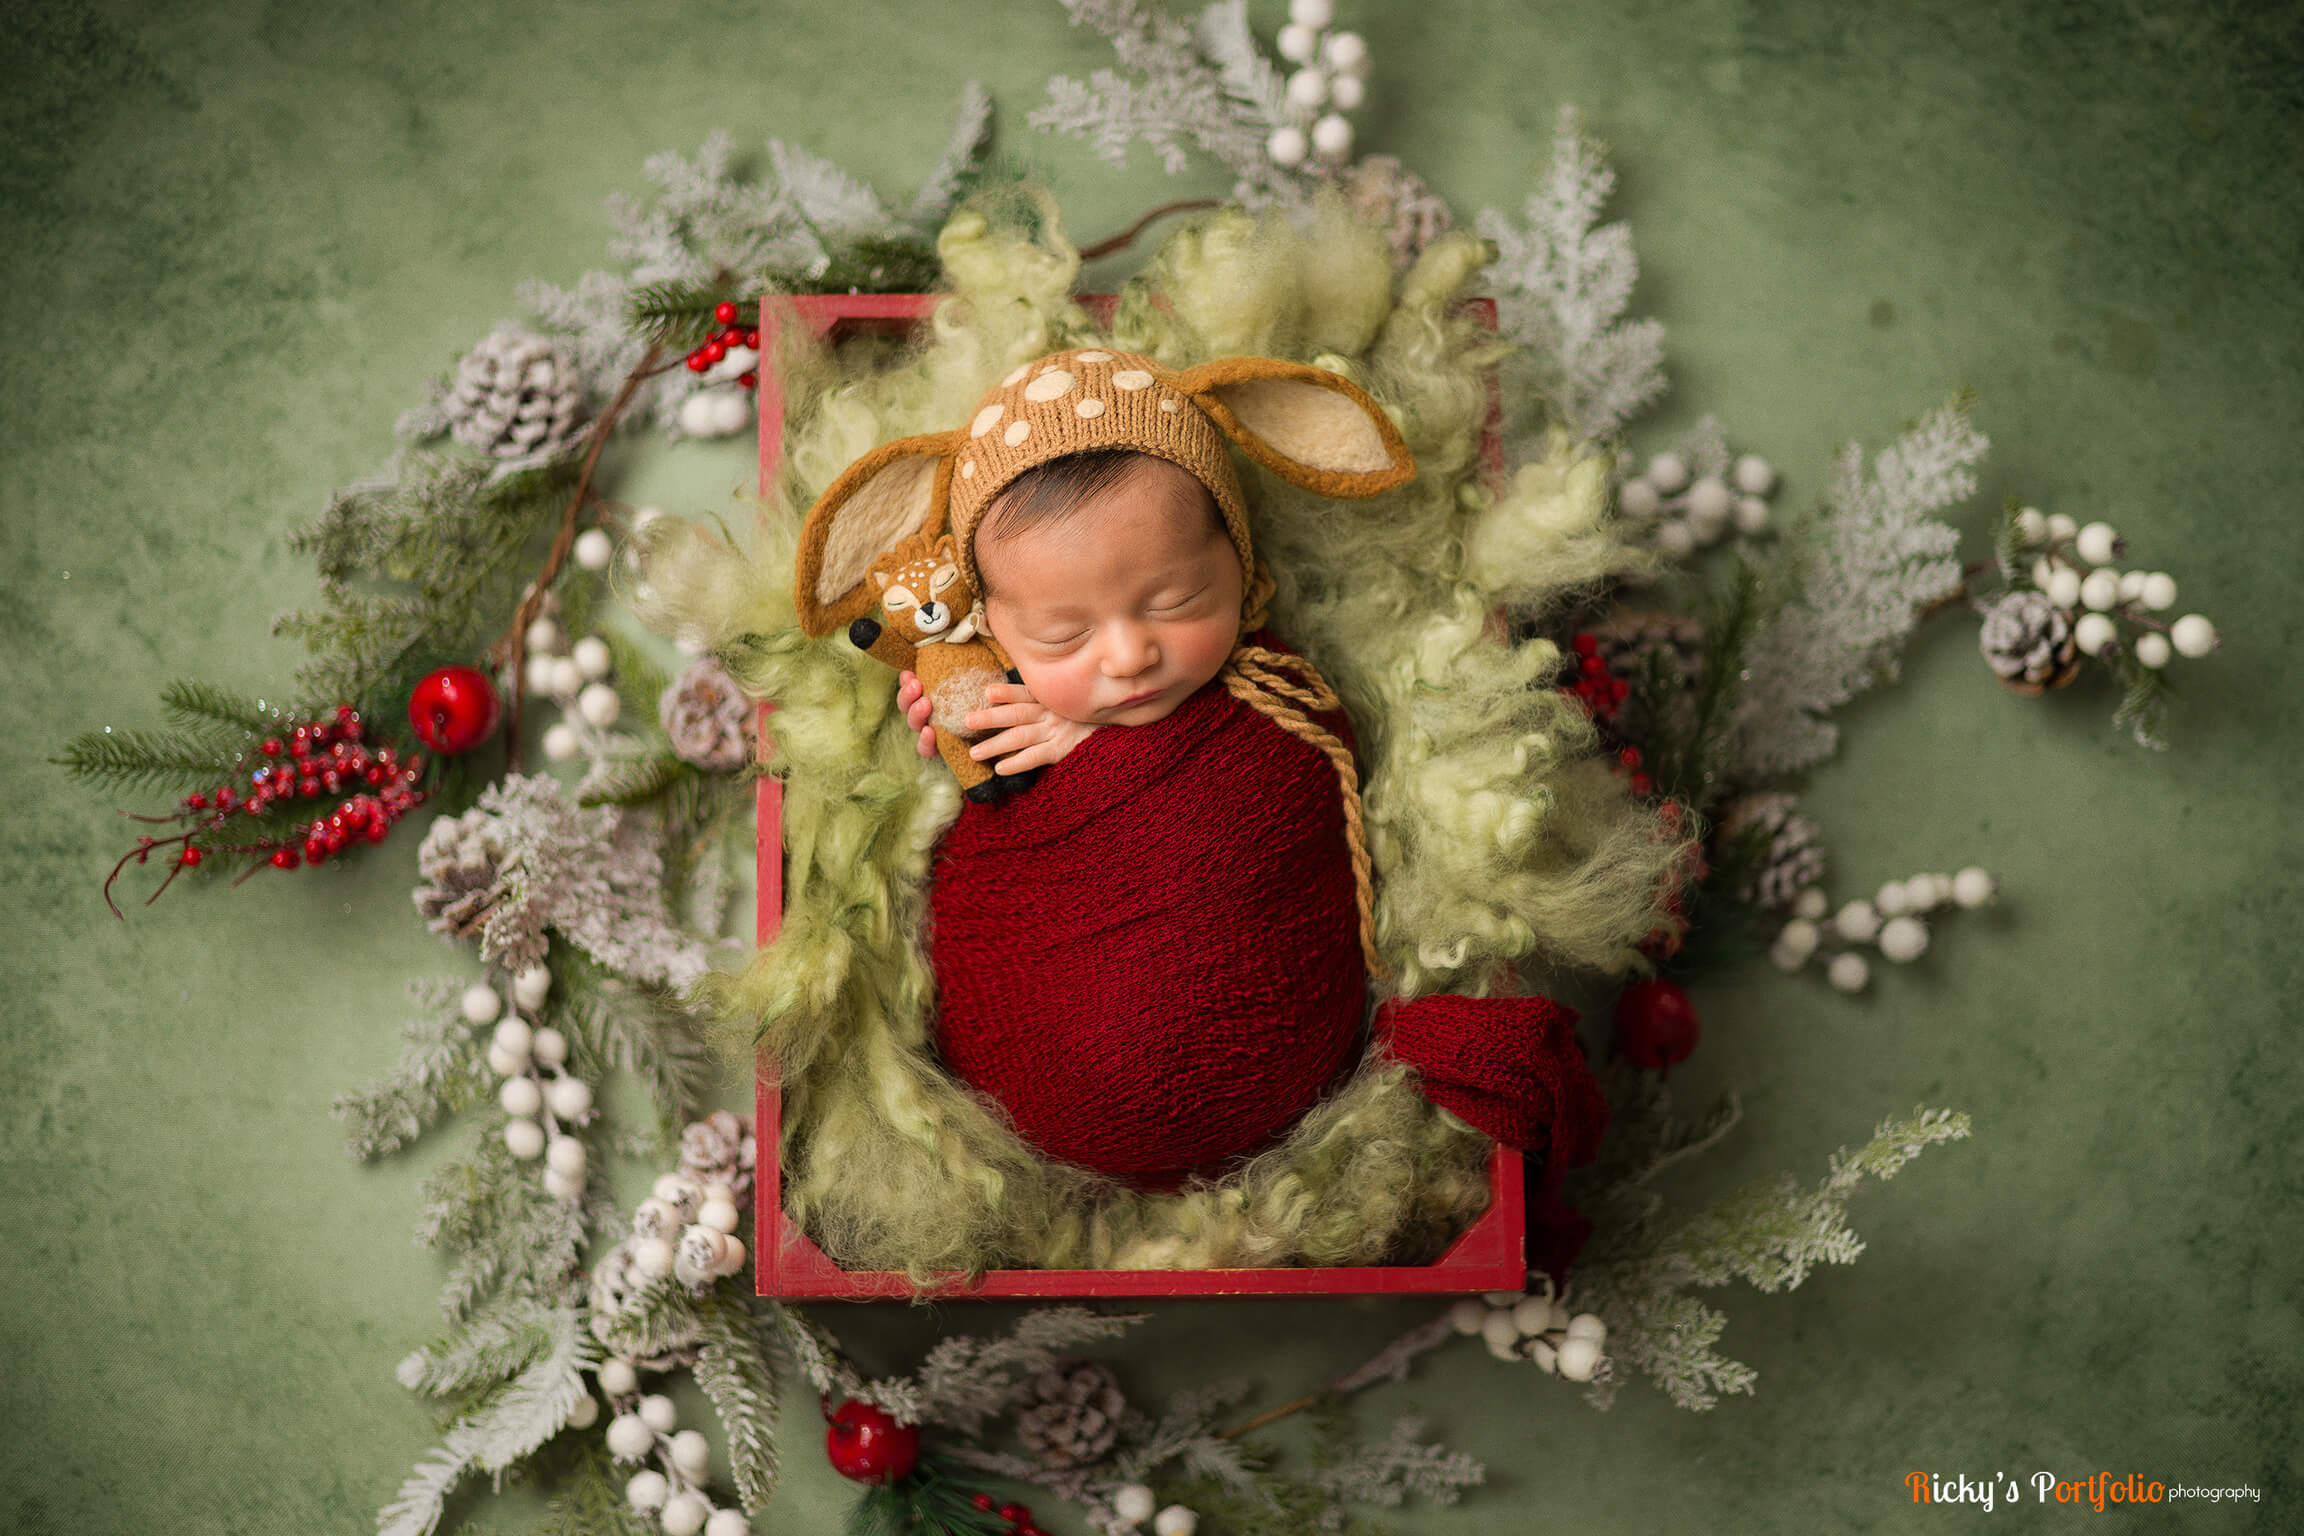 22 Expert Tips for Getting Amazing DIY Newborn Pictures